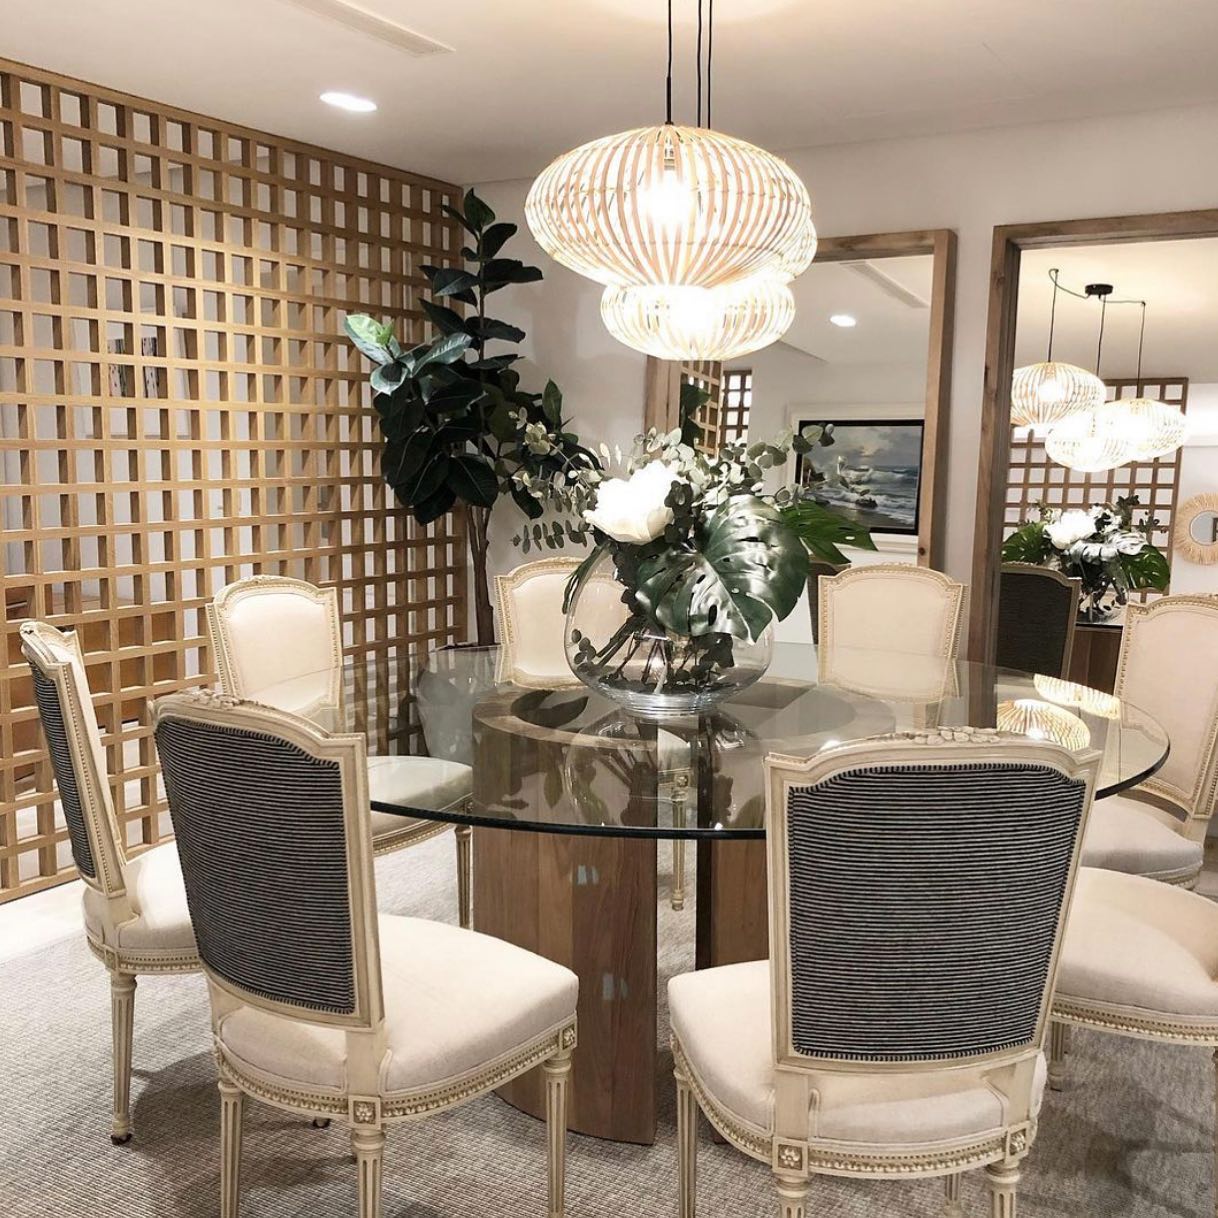 A transitional dining room full of class, memorability , personality and a comfortable sophistication by @carlosalvarezlop His thoughtful designs, always include an imminent respect for quality, always with the goal to create memorability; a quiet and timeless drama of sorts that becomes addictive to the eyes.  Learn more about this incredible designer on our blog - Link on profile .
.
.
.
#inconversation #carlosalvarezlopez #ivanmeade #lifemstyleblog #interview #interiordesign #interiorismo #diseñodeinteriores #estilo #style #spanishdesign #spanishdesigner #diseñadorespañol #spain #picoftheday #instagood #instadesign #madridmemola #homeoffice #livingroom #sala #instadesign #picoftheday #instagood #diningroom